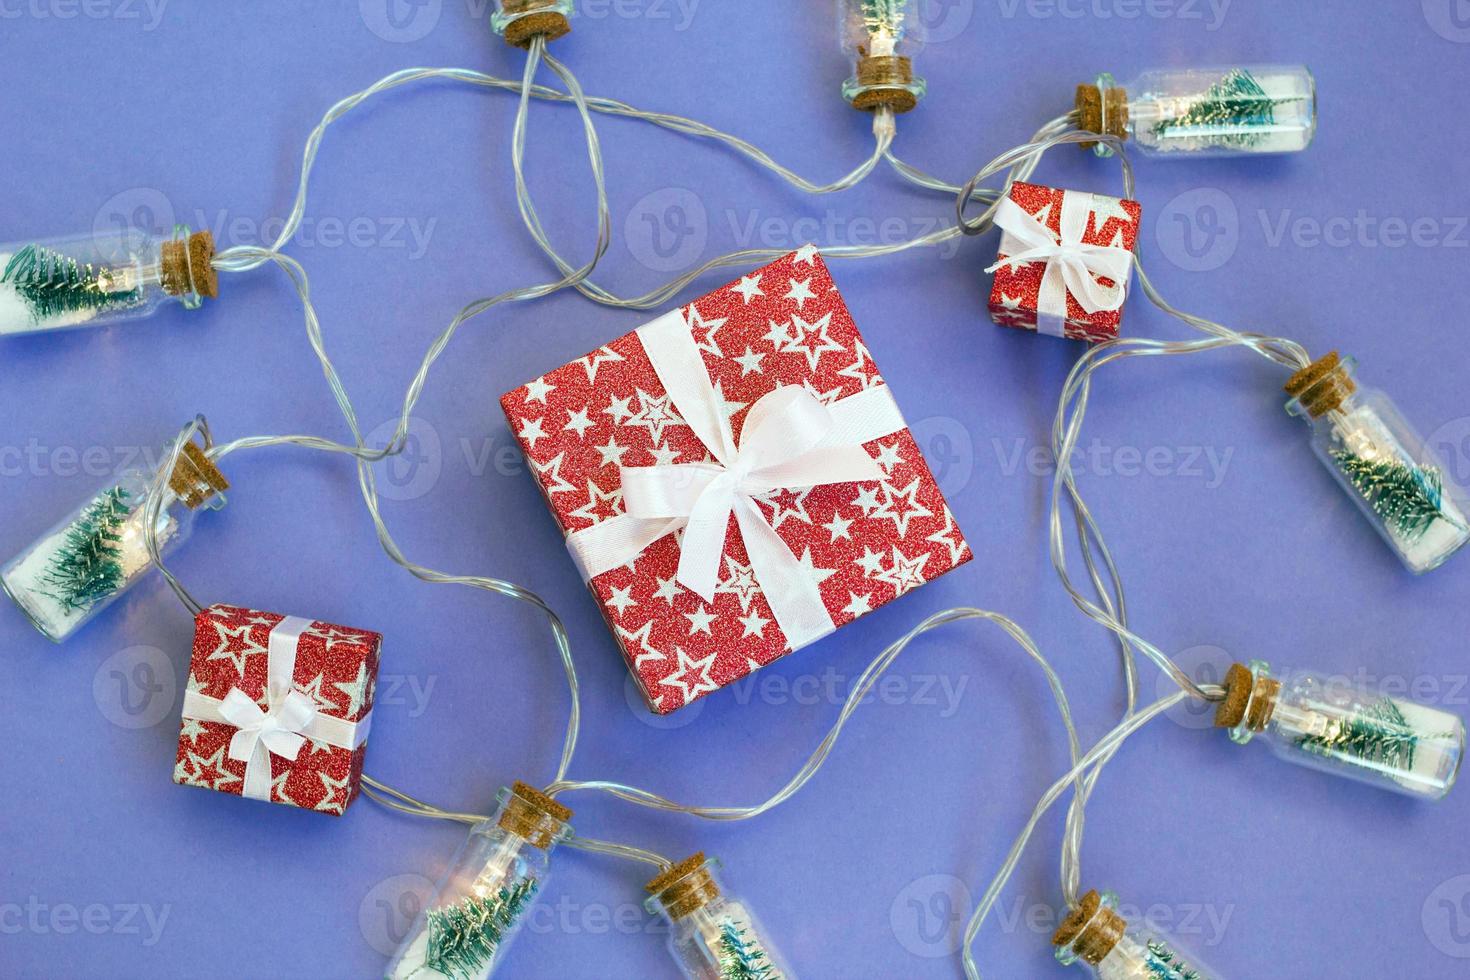 Gift boxes wrapped in red shiny paper on purple background with lights. Holiday concept for New Year or Christmas. photo